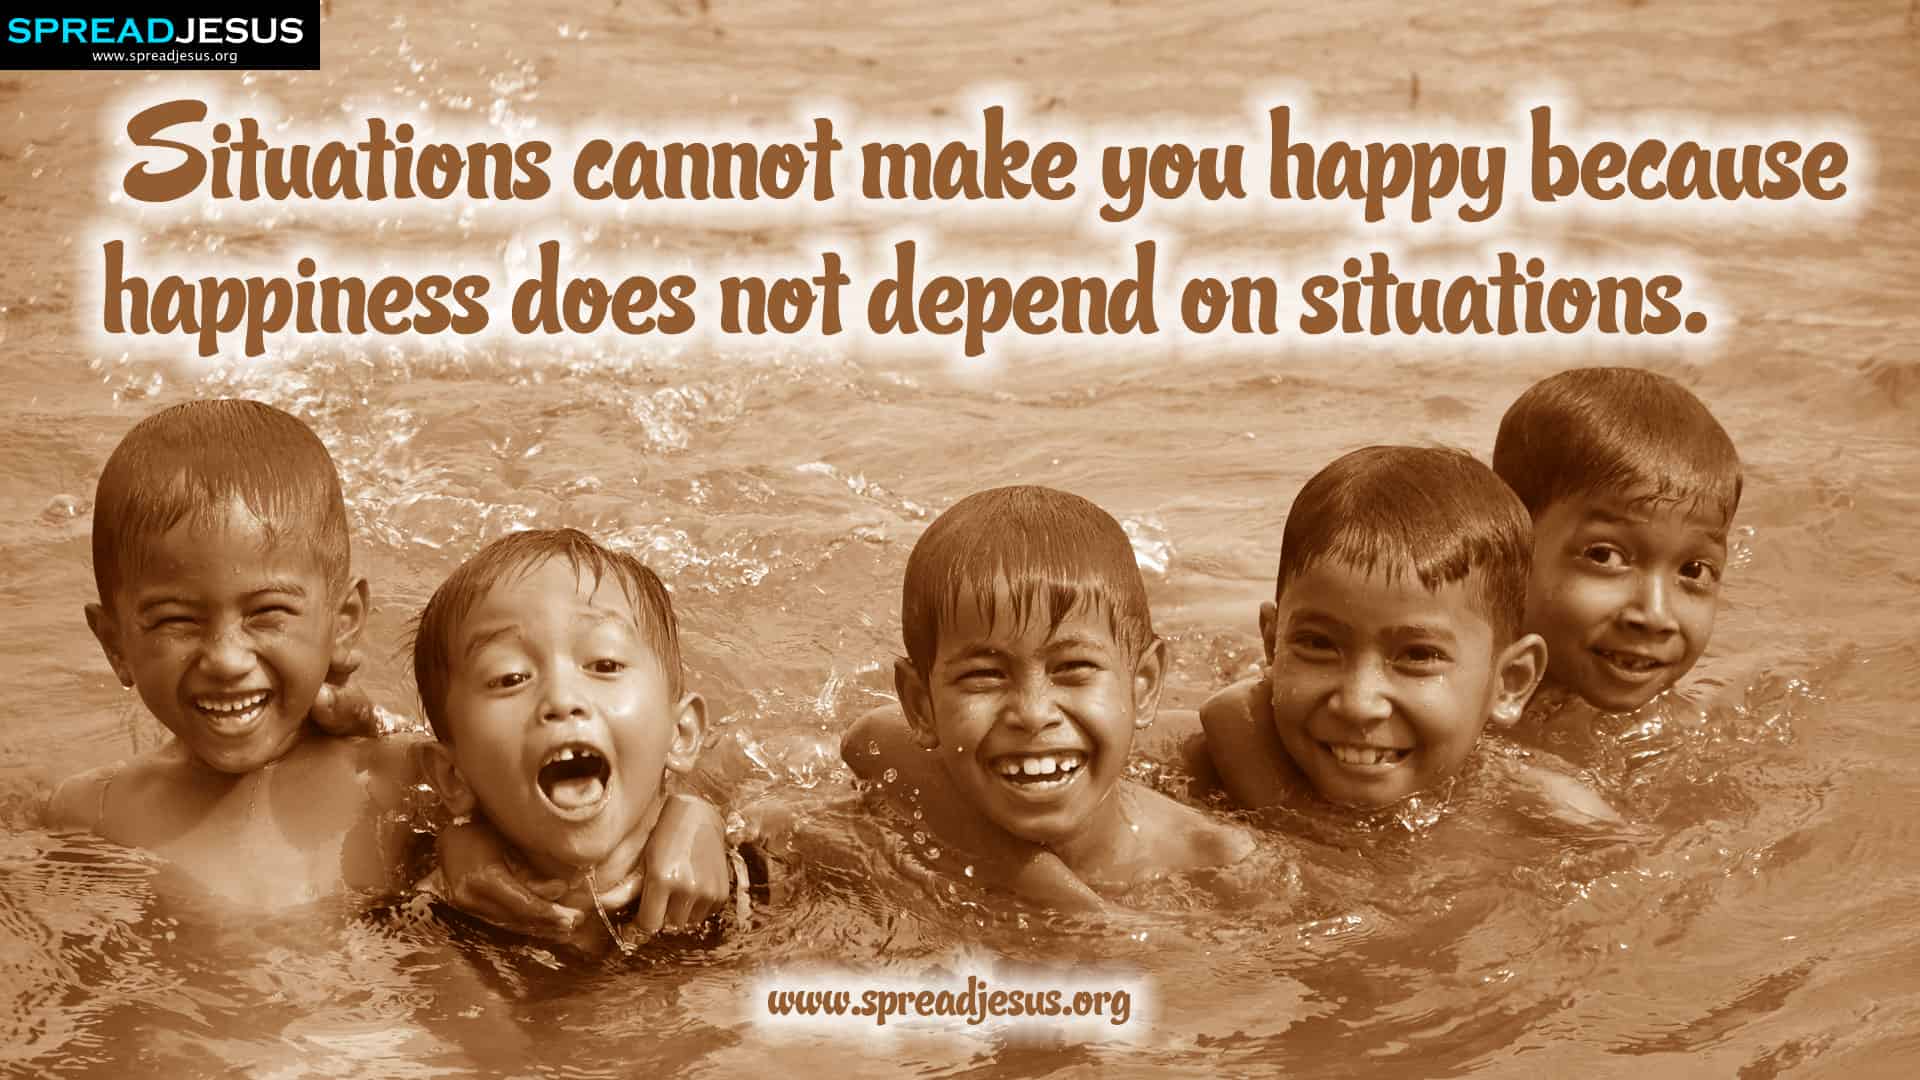 Обои make you Happy. Wallpaper makes you Happy. Happiness quotes. Happy situation.